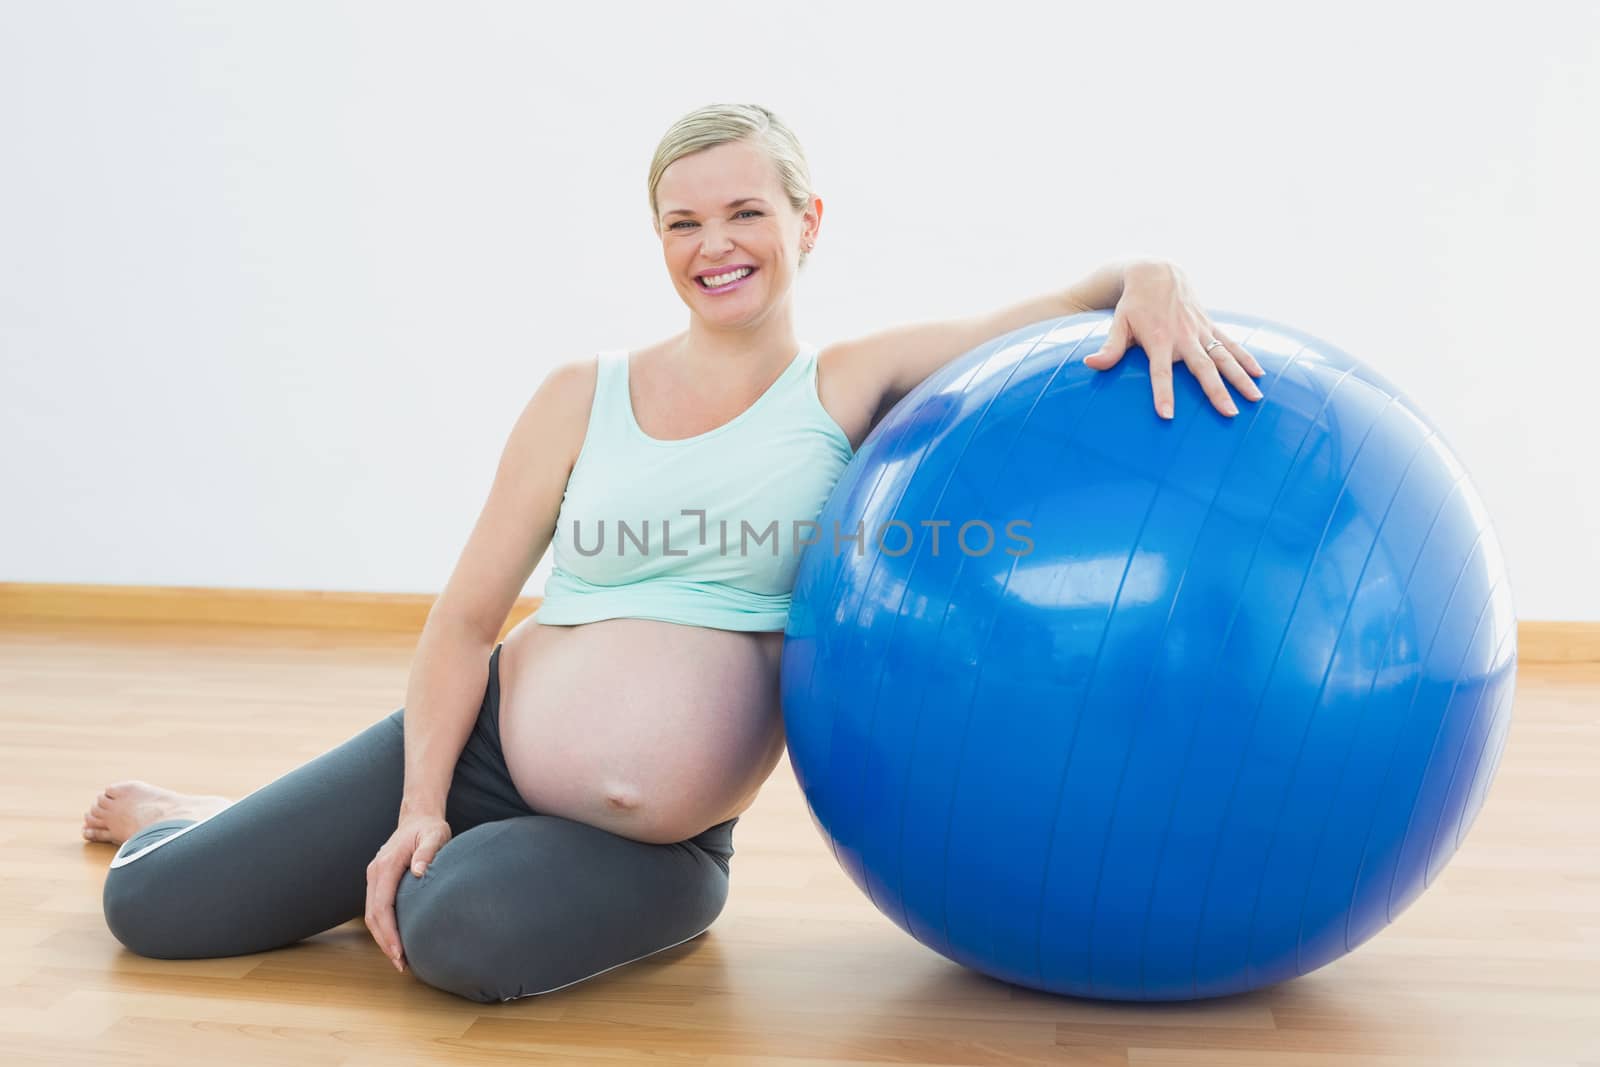 Pregnant woman sitting beside exercise ball smiling at camera in a fitness studio